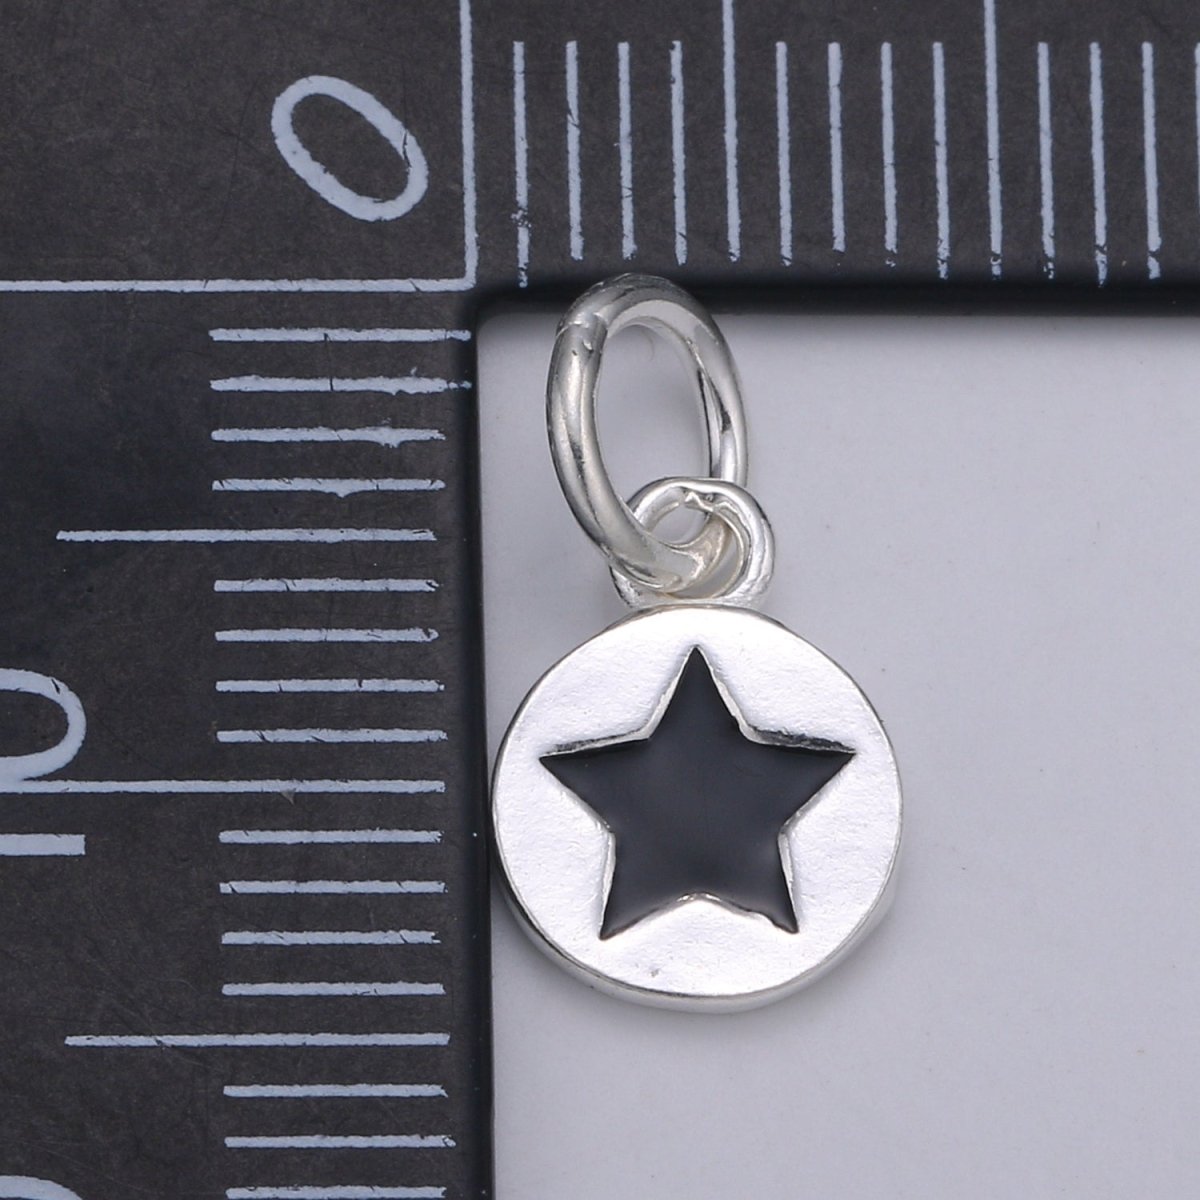 925 Sterling Silver Black Star Charm, Circle Charm Silver Star Charm for Necklace Bracelet Earring, Starry Charm, SL-020 - DLUXCA